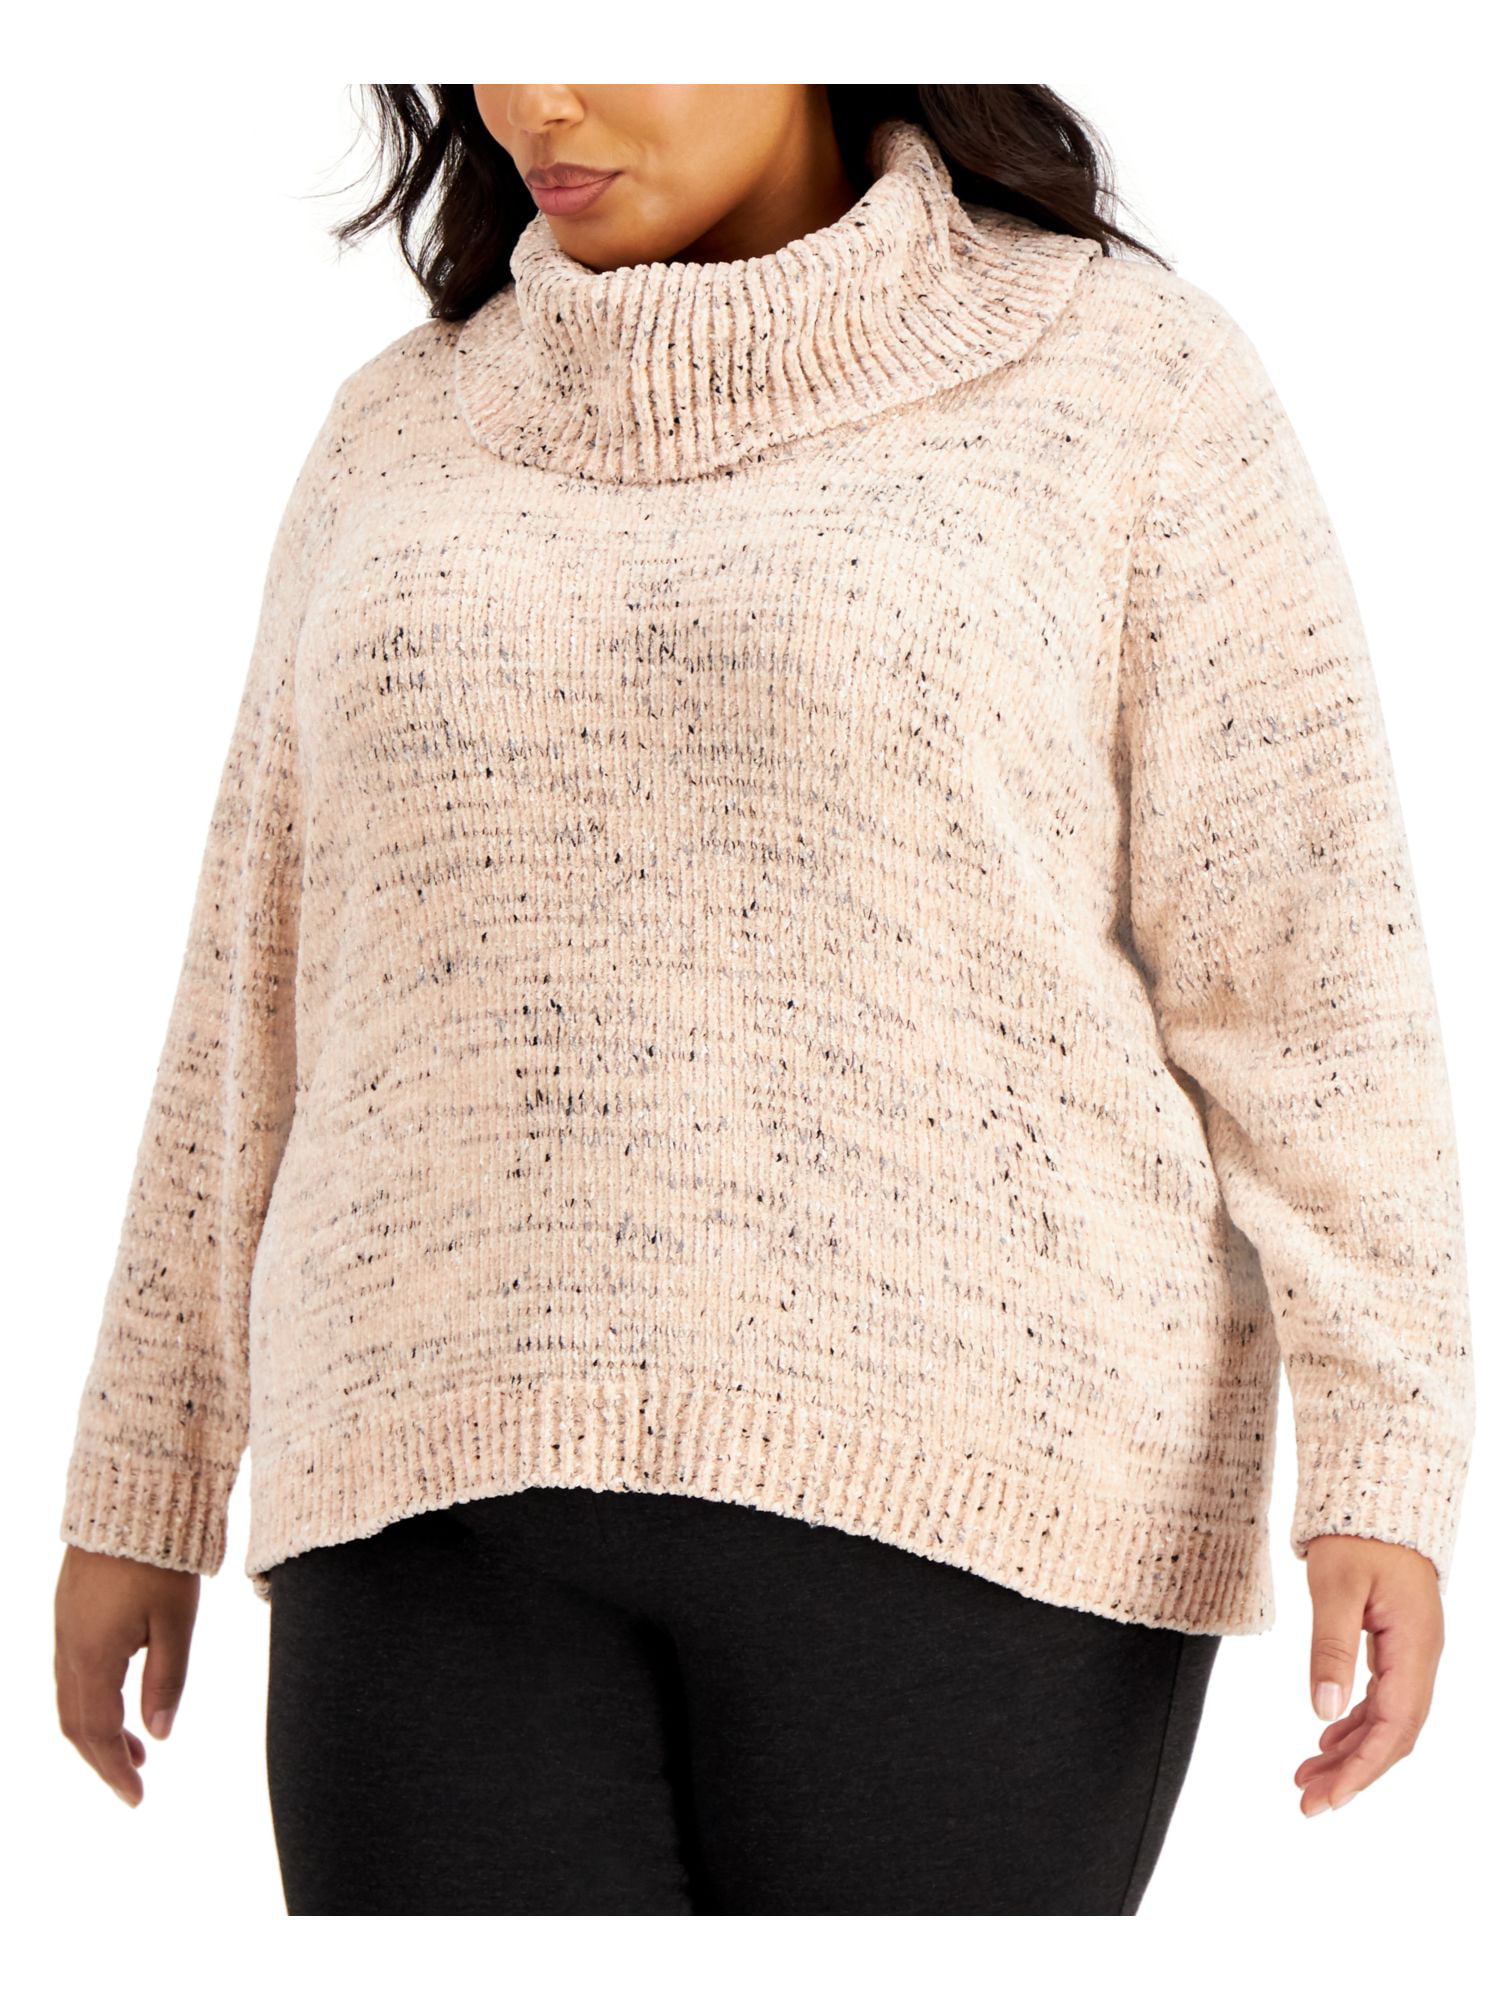 CALVIN KLEIN Womens White Speckle Long Sleeve Evening Sweater Plus Size: 1X  